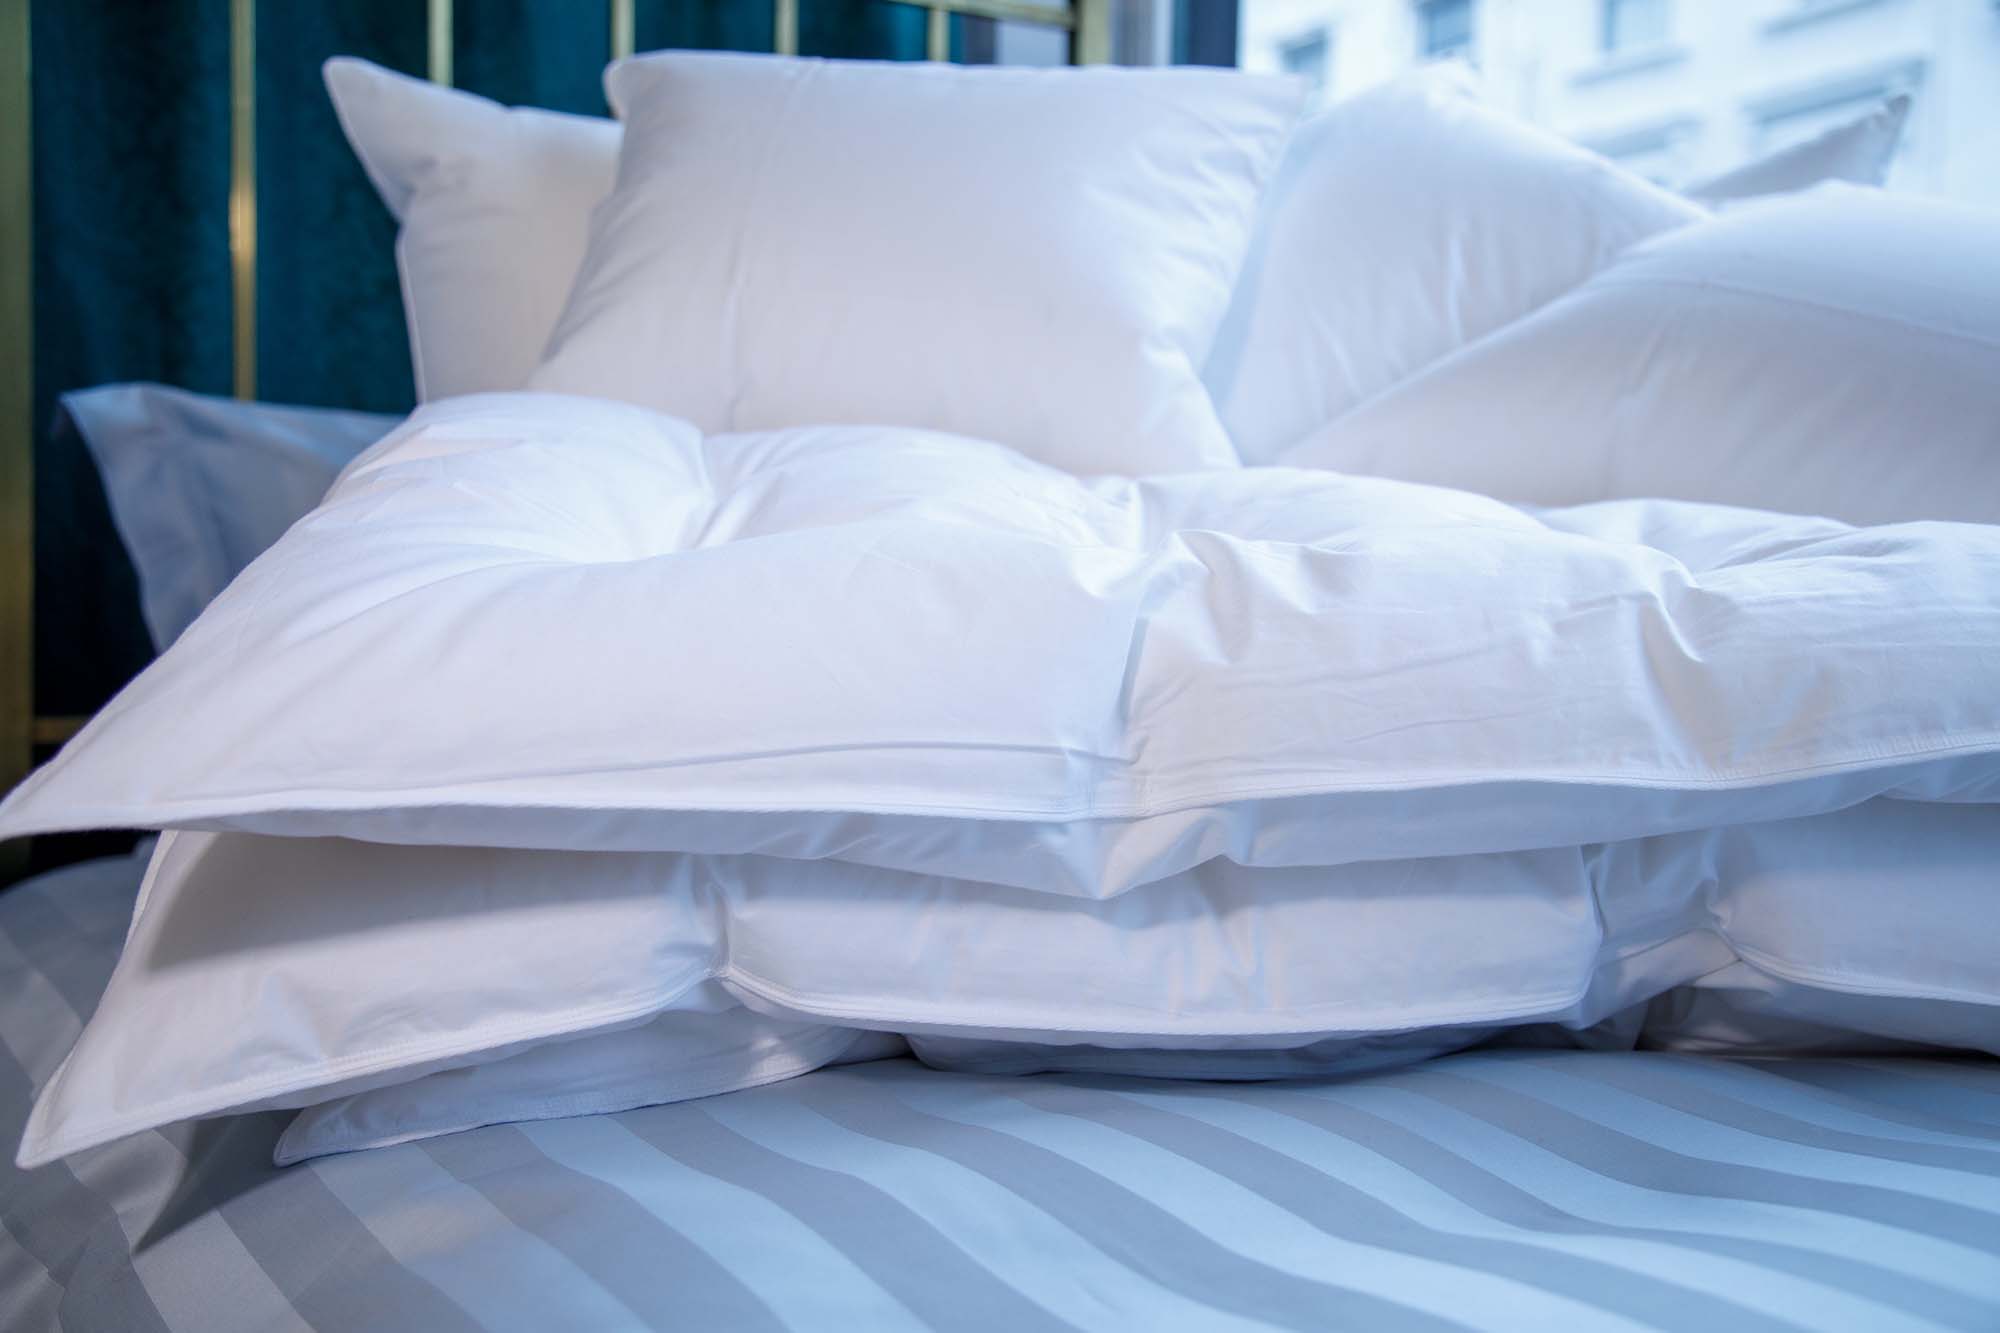 How To Dispose Pillows And Duvets